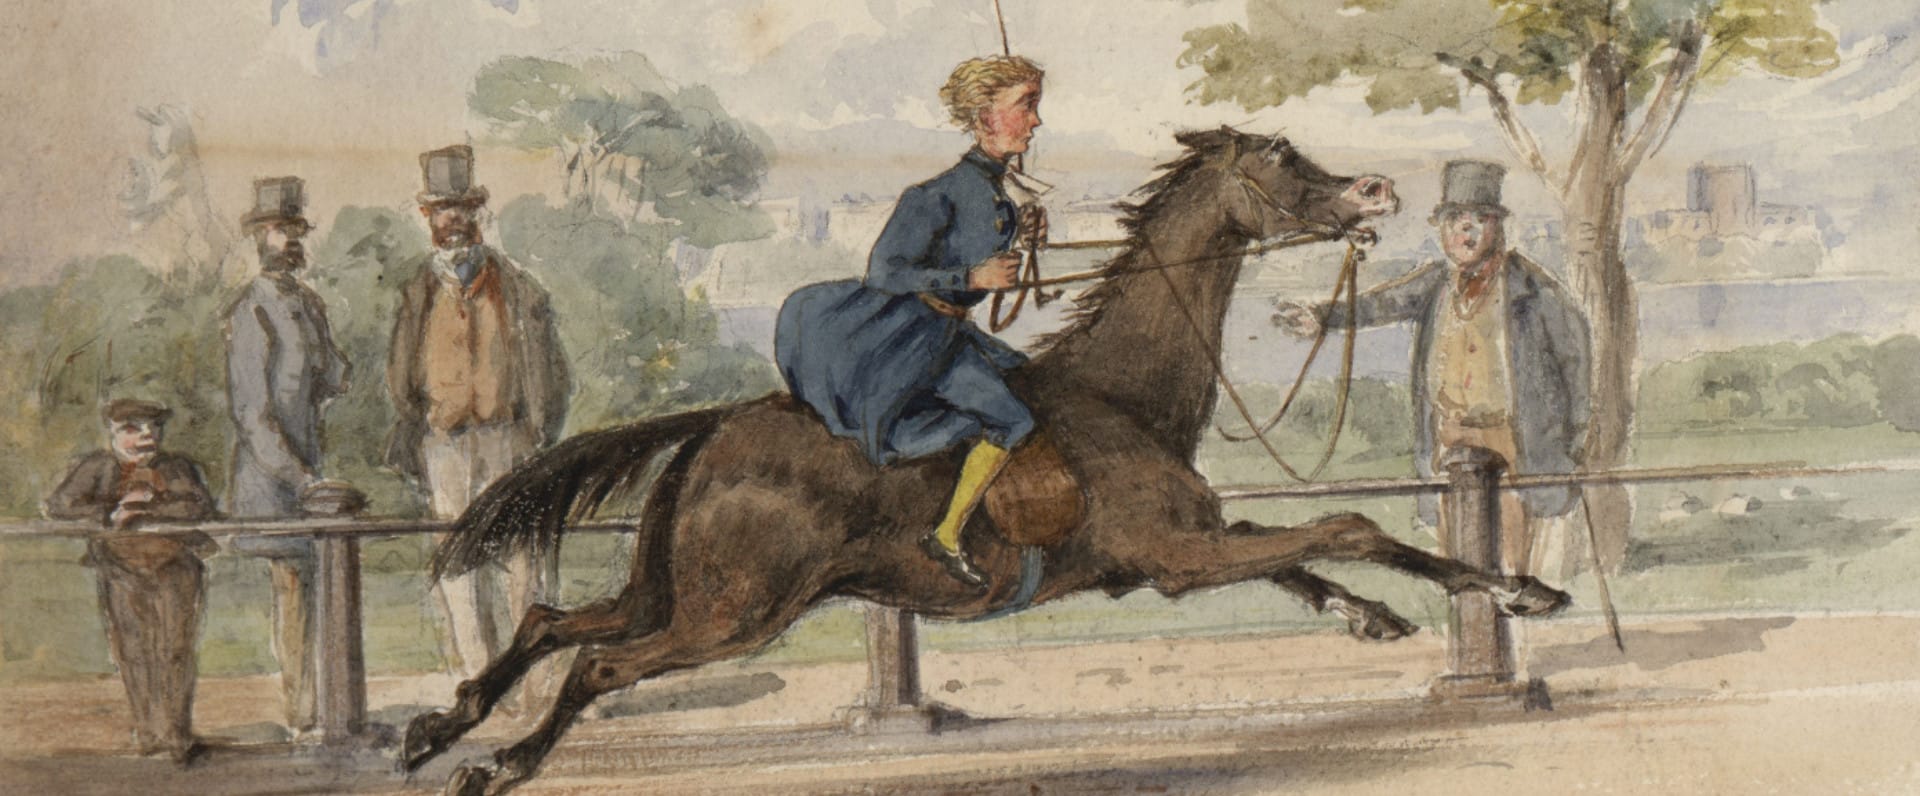 Horse Racing in the 1800s